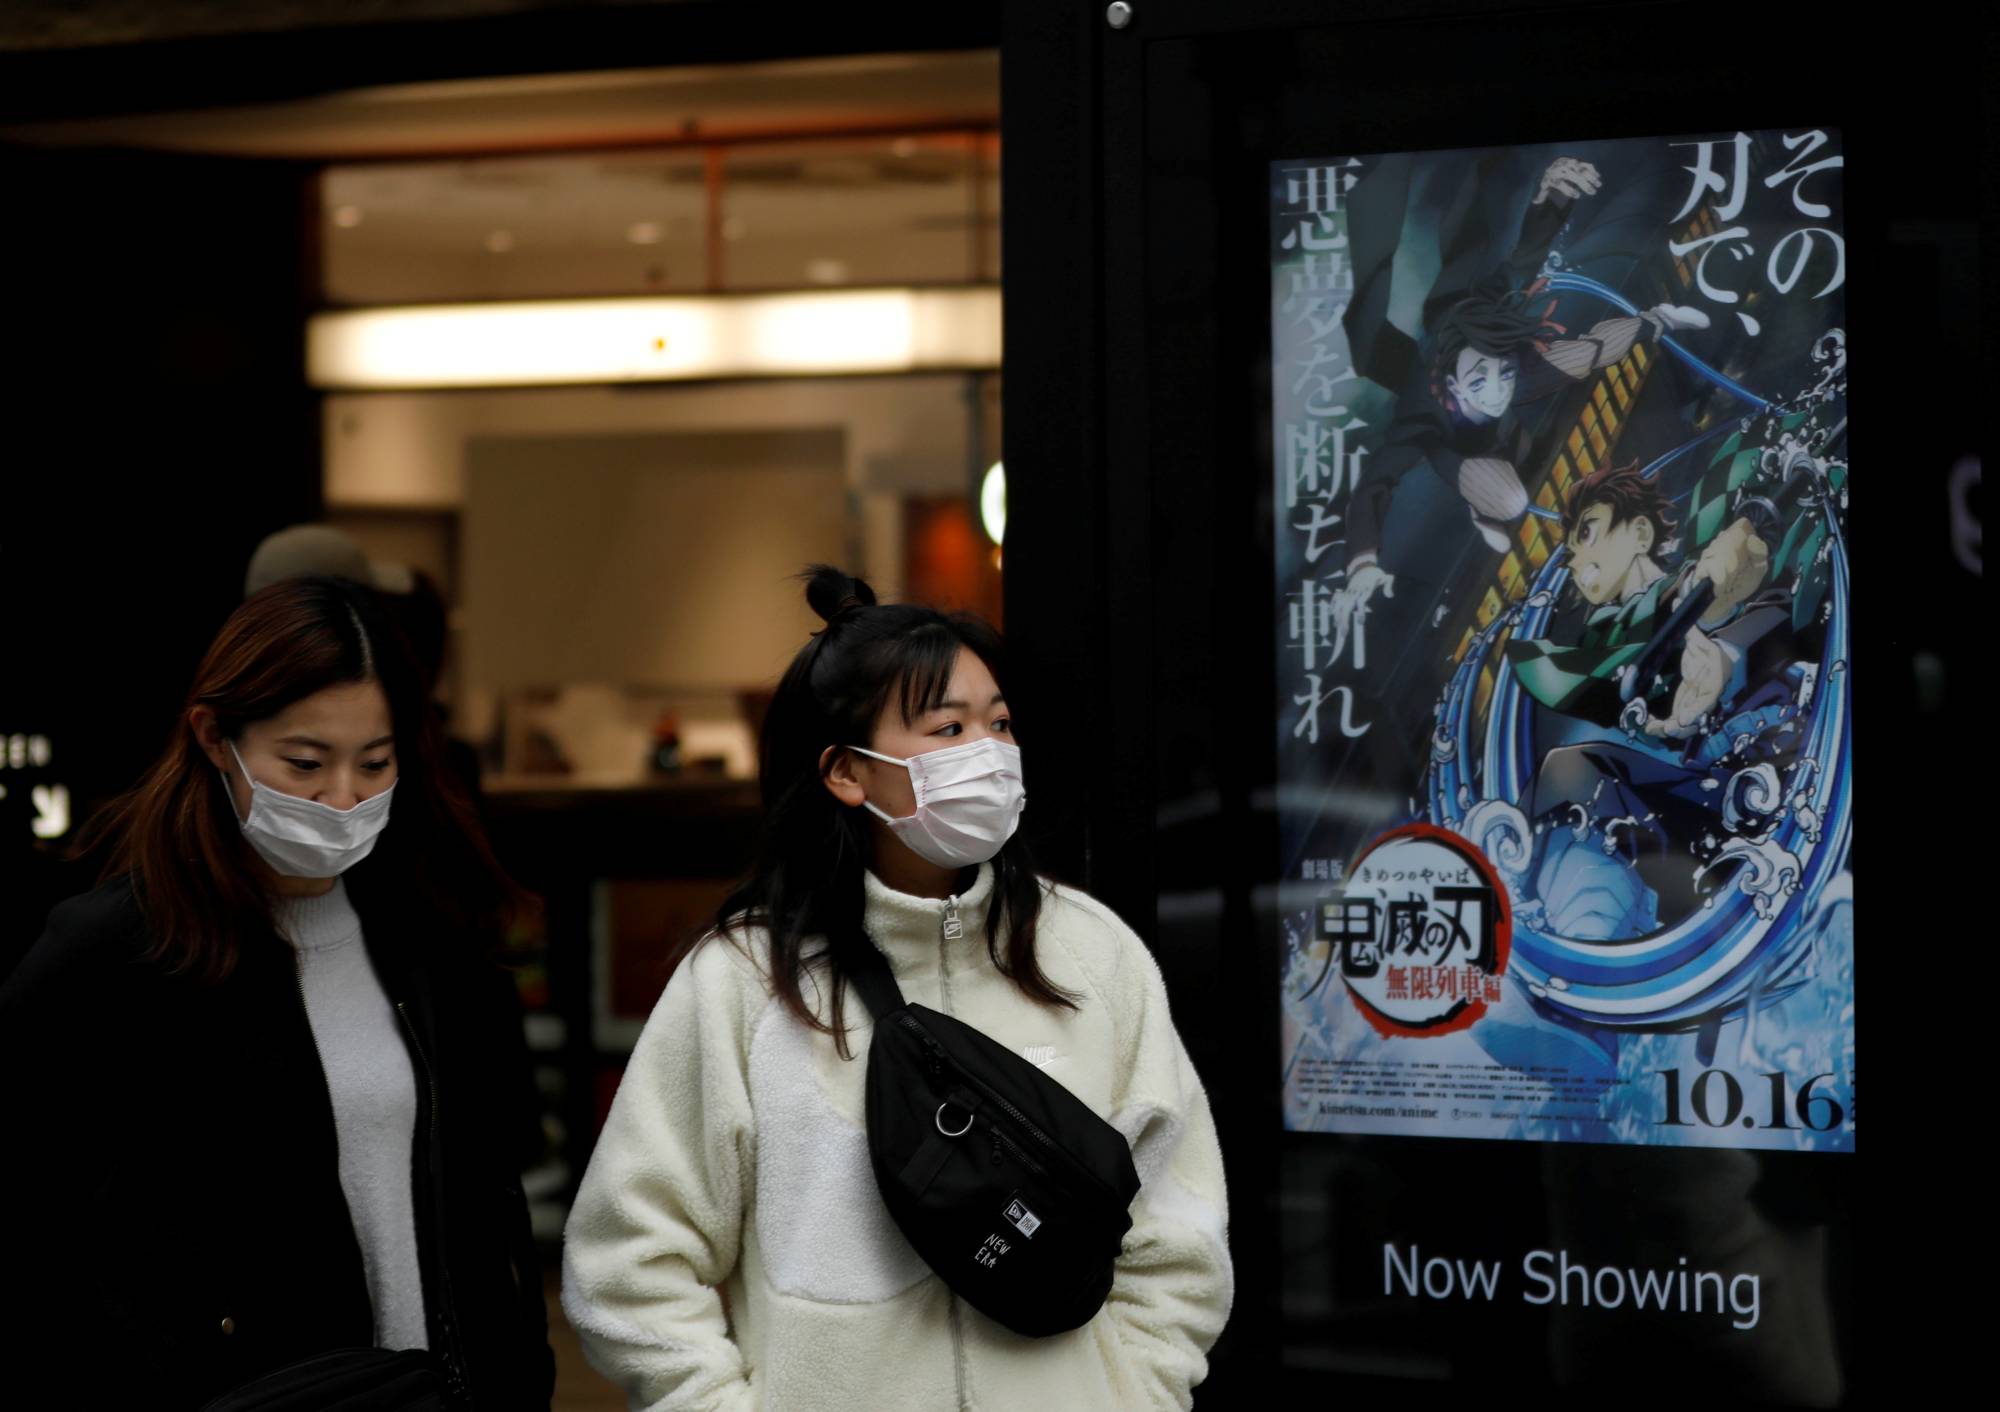 People walk past a poster for the animated movie 'Demon slayer' in December. | REUTERS